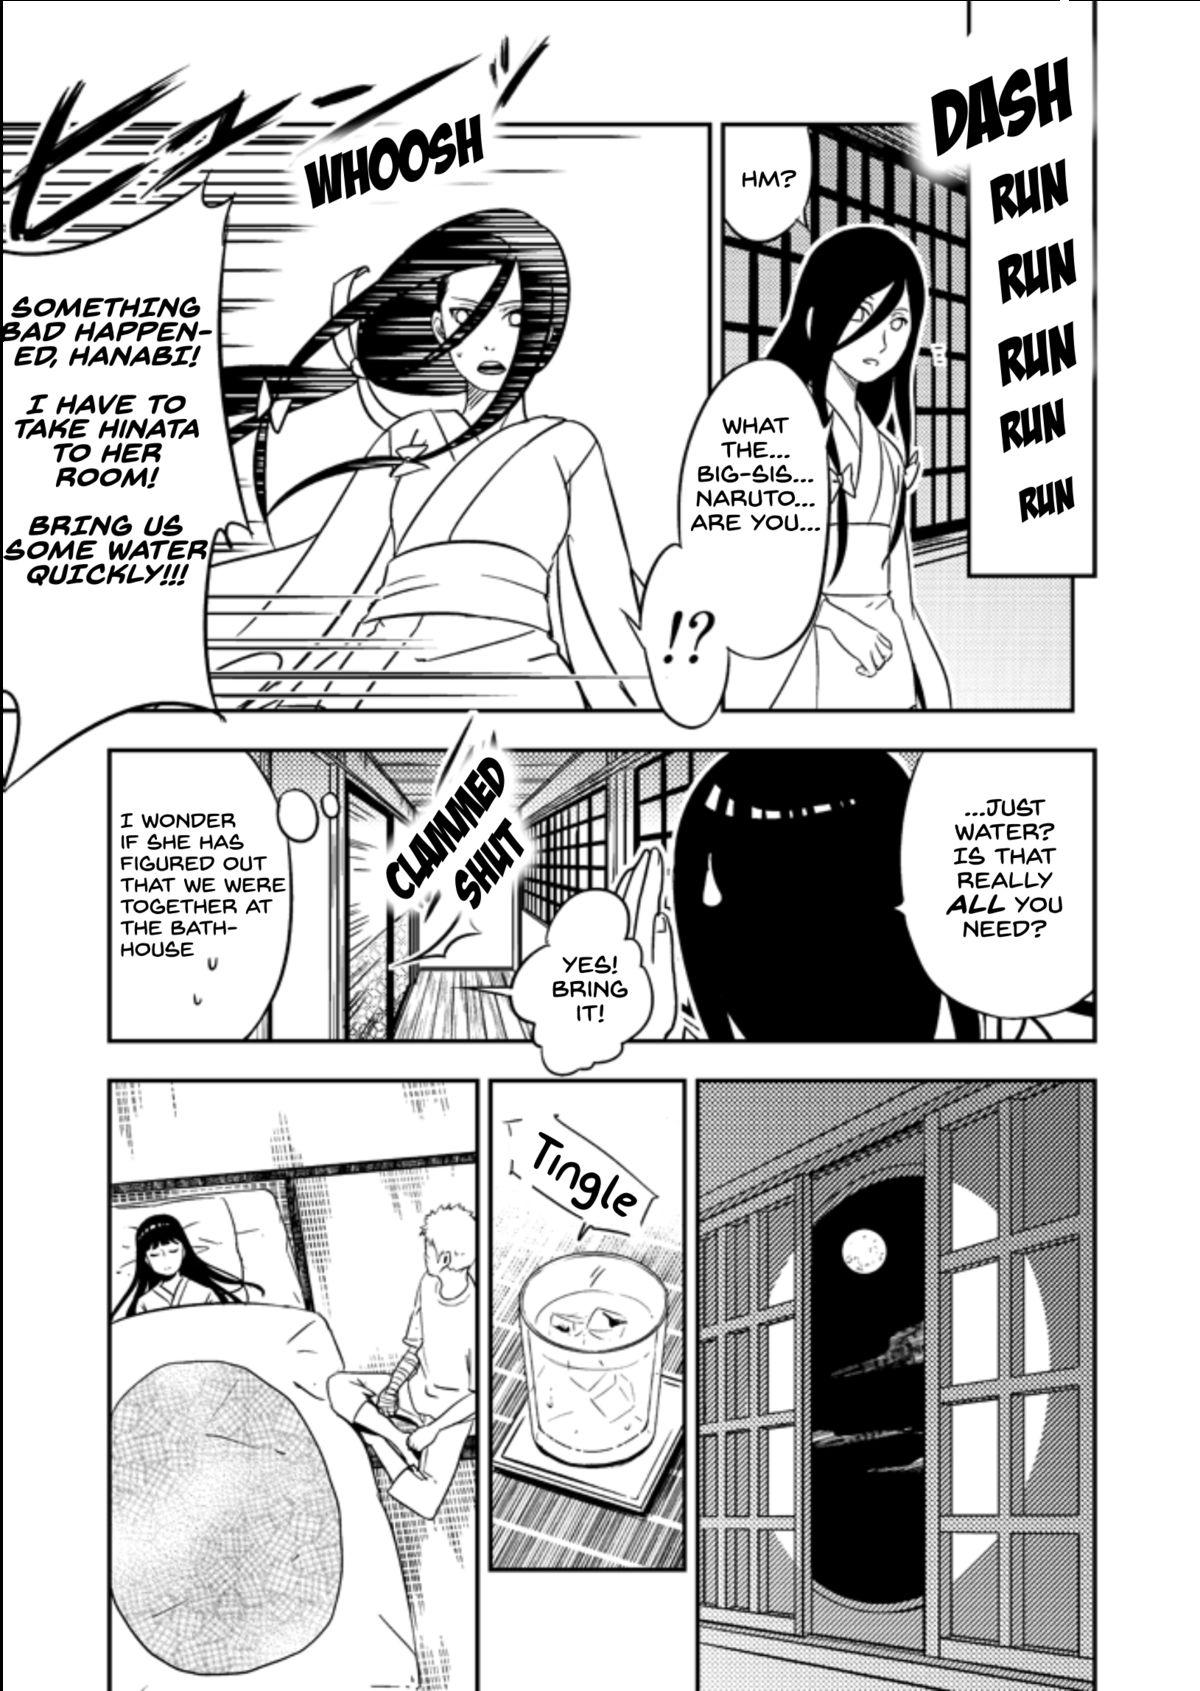 Awesome A trip to the Hyuga Onsen - Naruto Freaky - Page 6